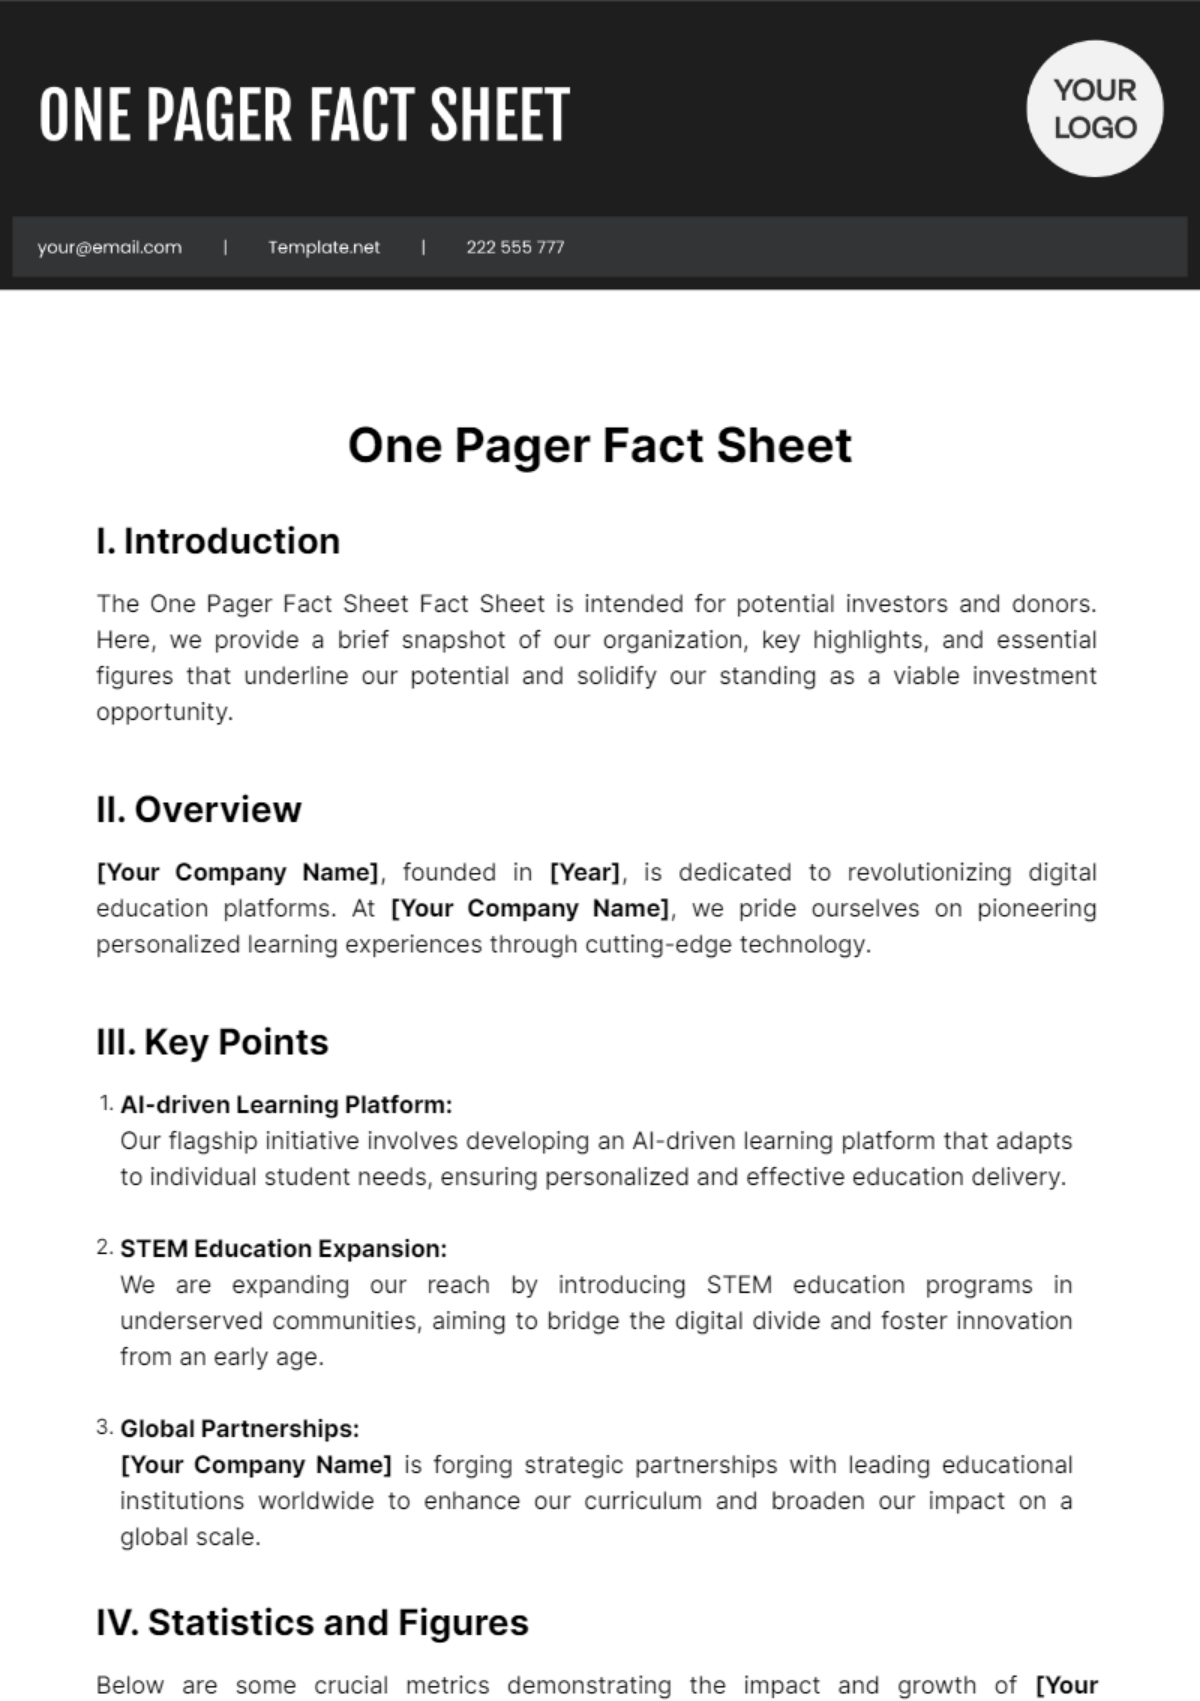 One Pager Organization Fact Sheet Template